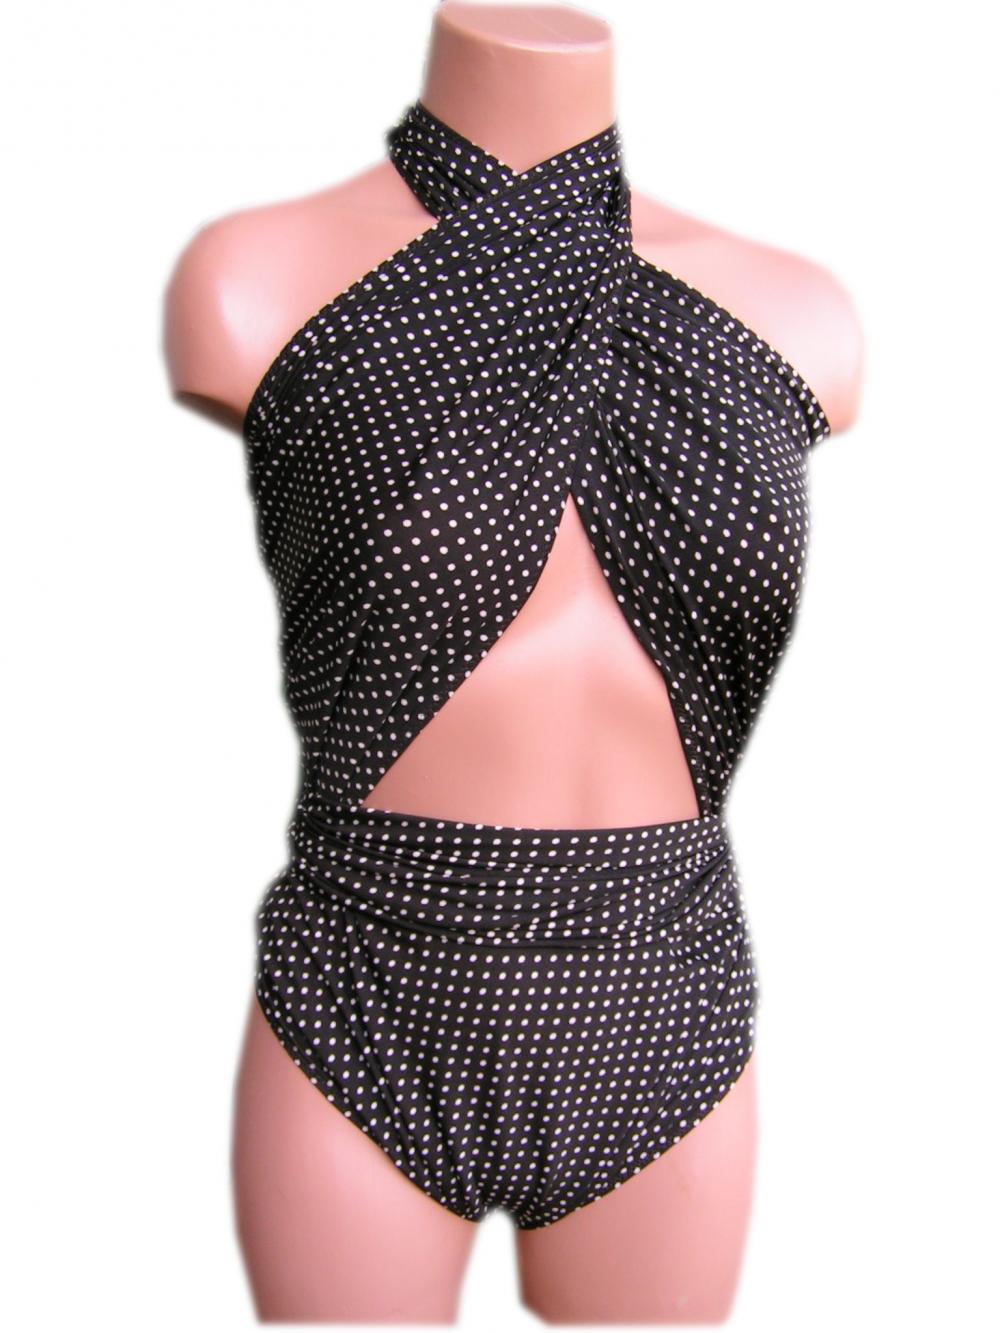 Large Bathing Suit Wrap Around Swimsuit Dark Brown And Off White Polka Dots Plus Size